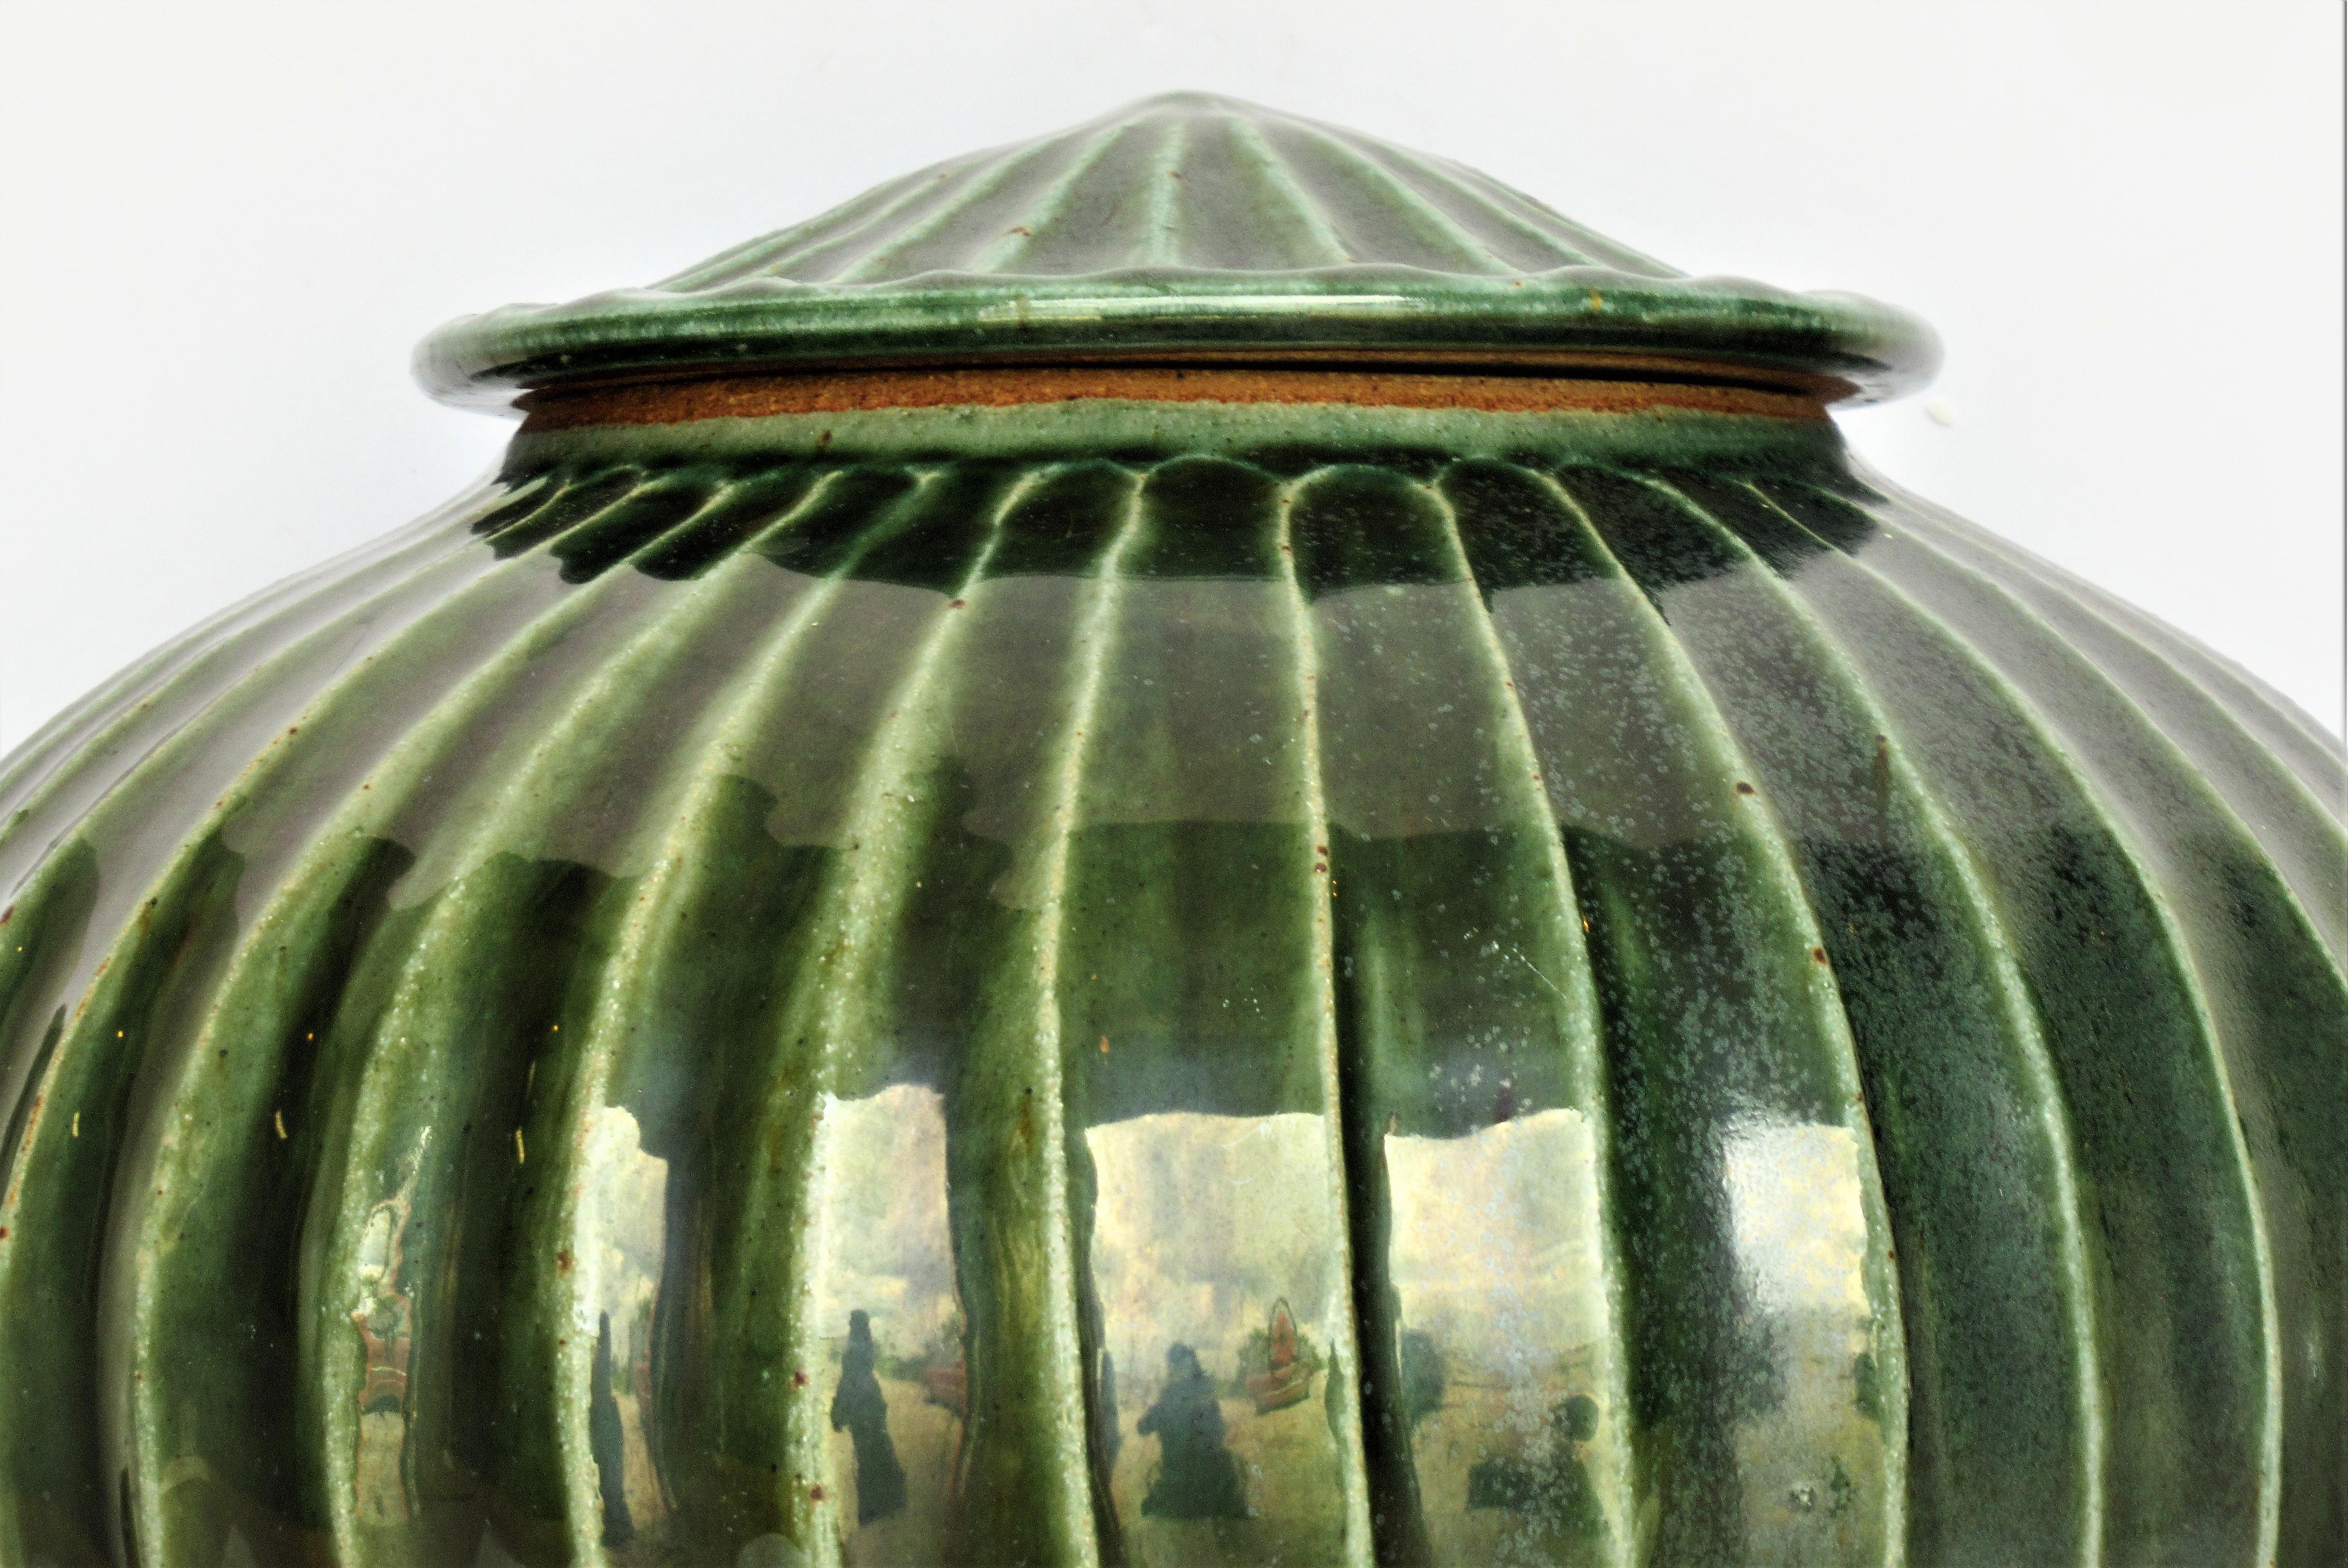 Hand thrown stoneware fluted bulbous gourd pumpkin shaped lidded vessel with a Japanese archaic modernist aesthetic and an exceptionally beautiful deep celadon jade green high glaze. Impressed makers mark on underside ( img. 8 / 9 ) but cannot